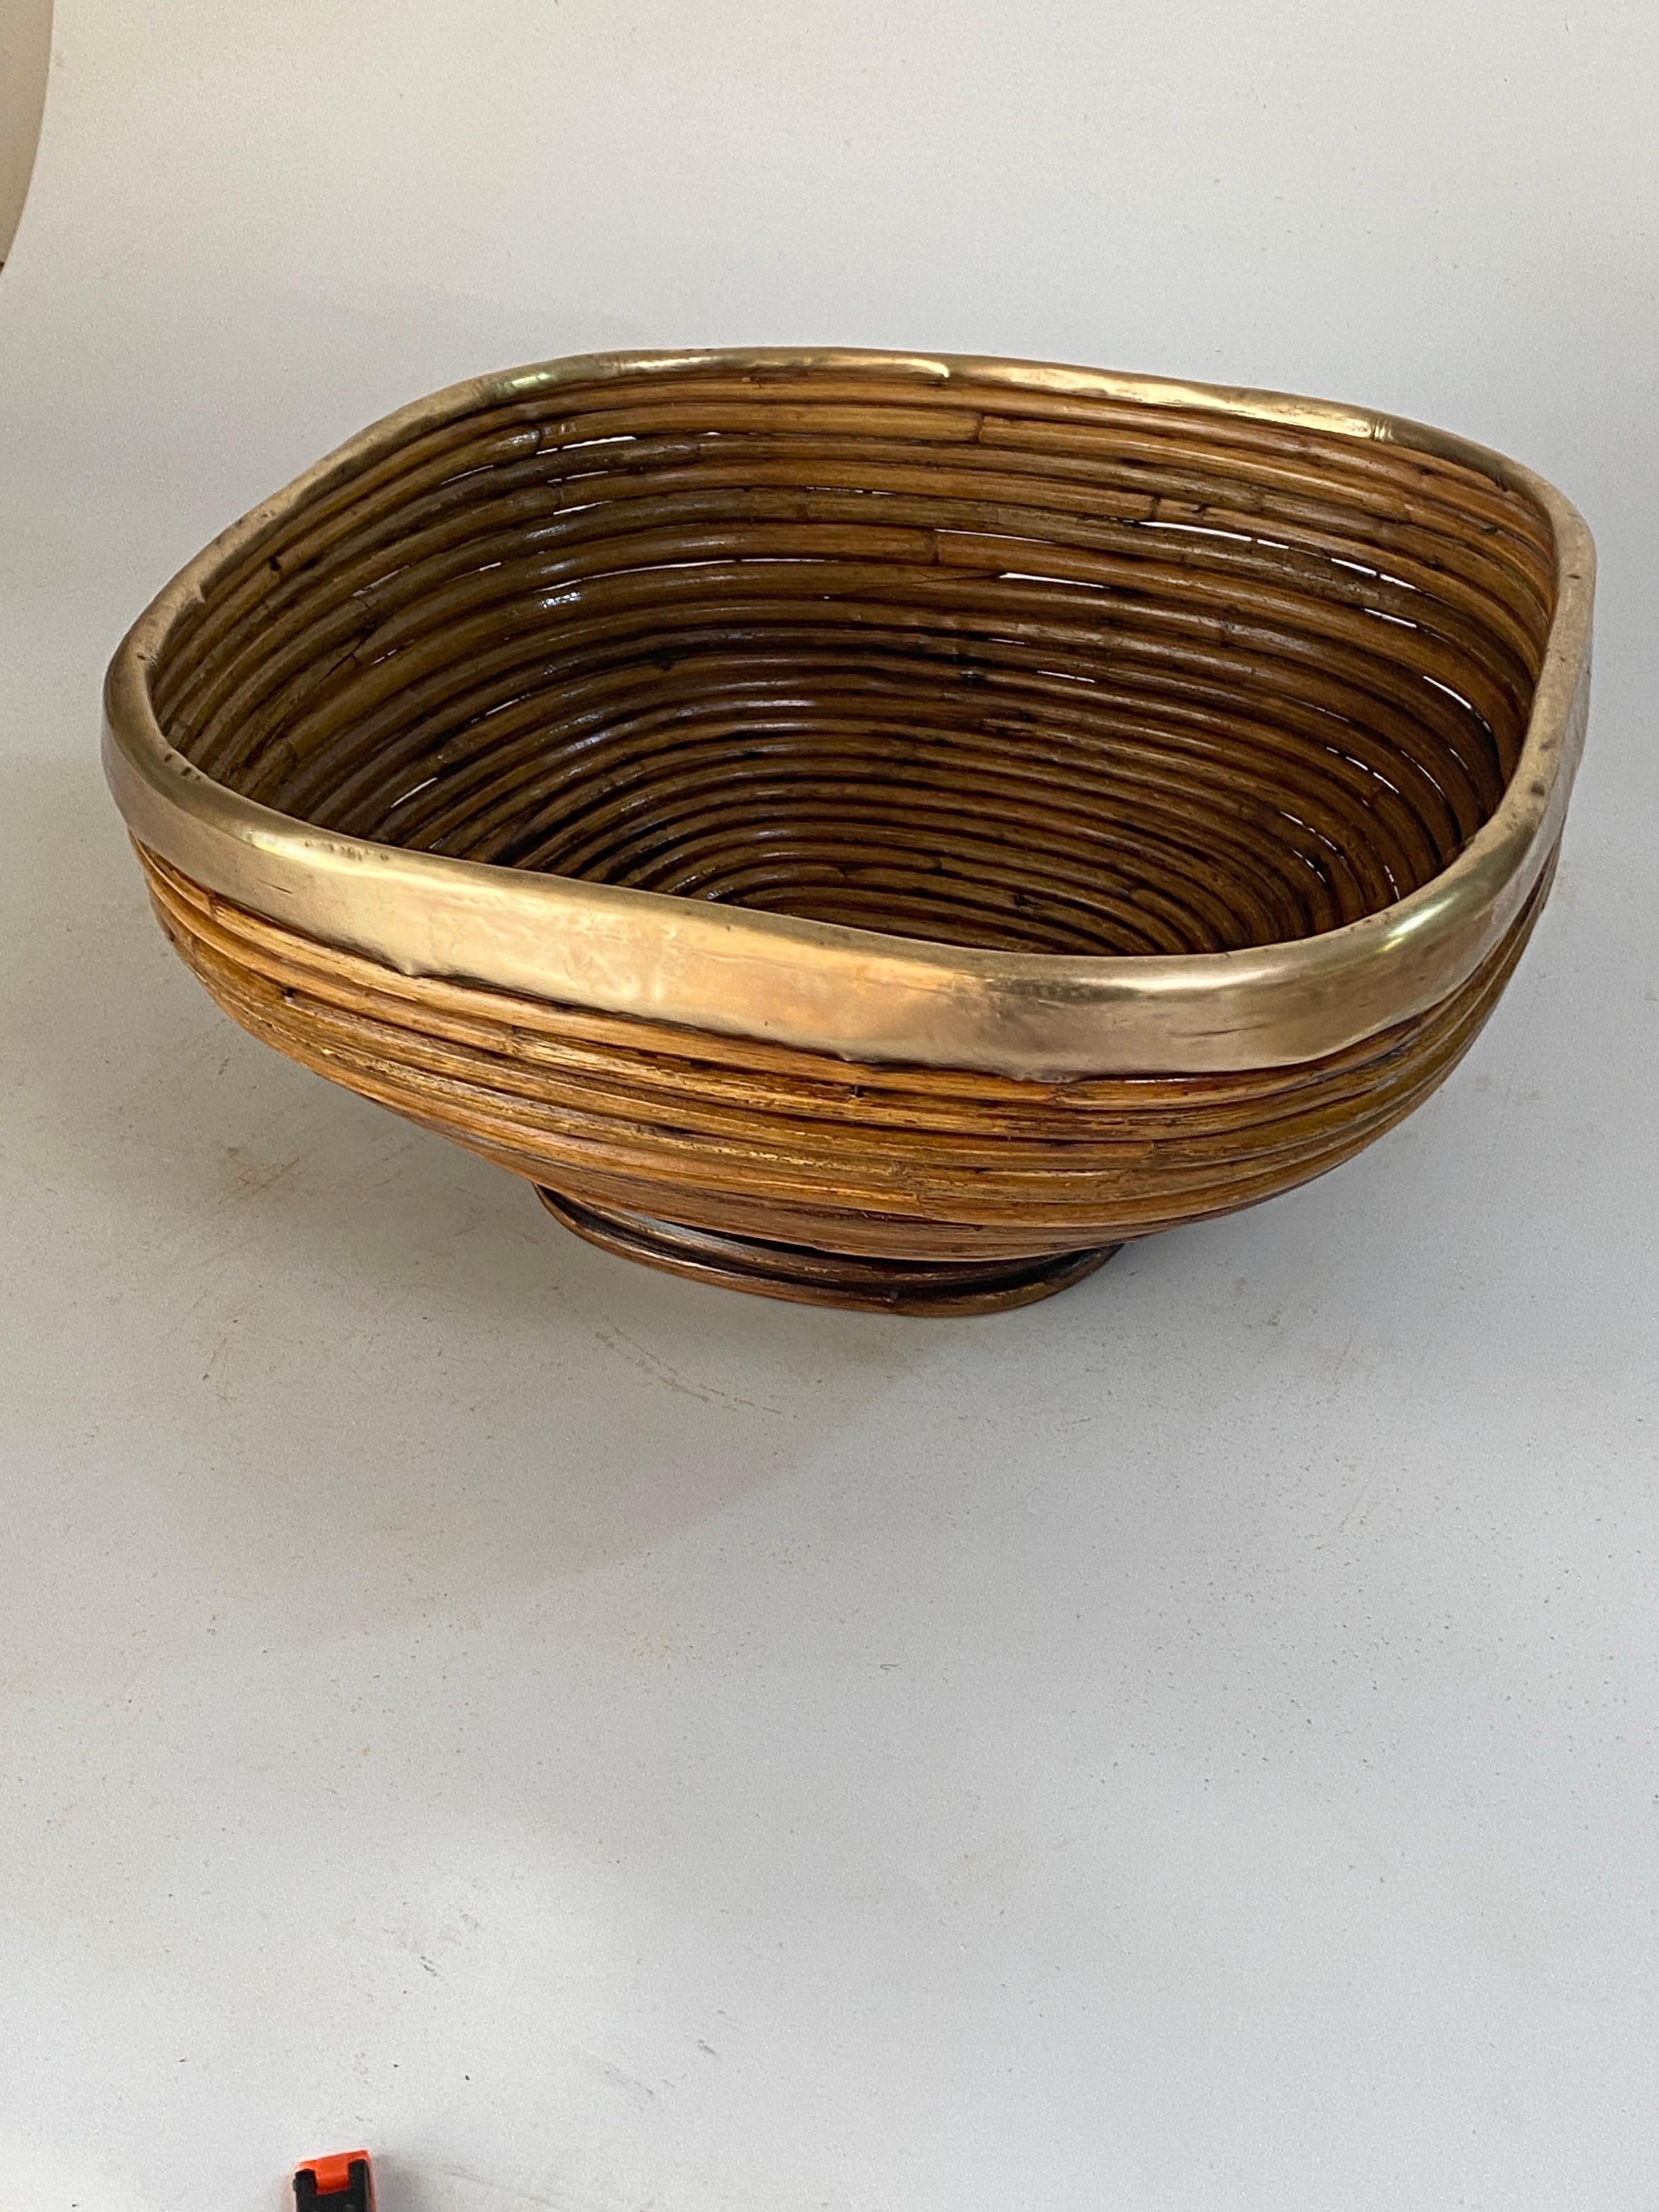 Rattan and Brass Italian Large Basket Bowl Centerpiece, 1970s Crespi Style For Sale 10